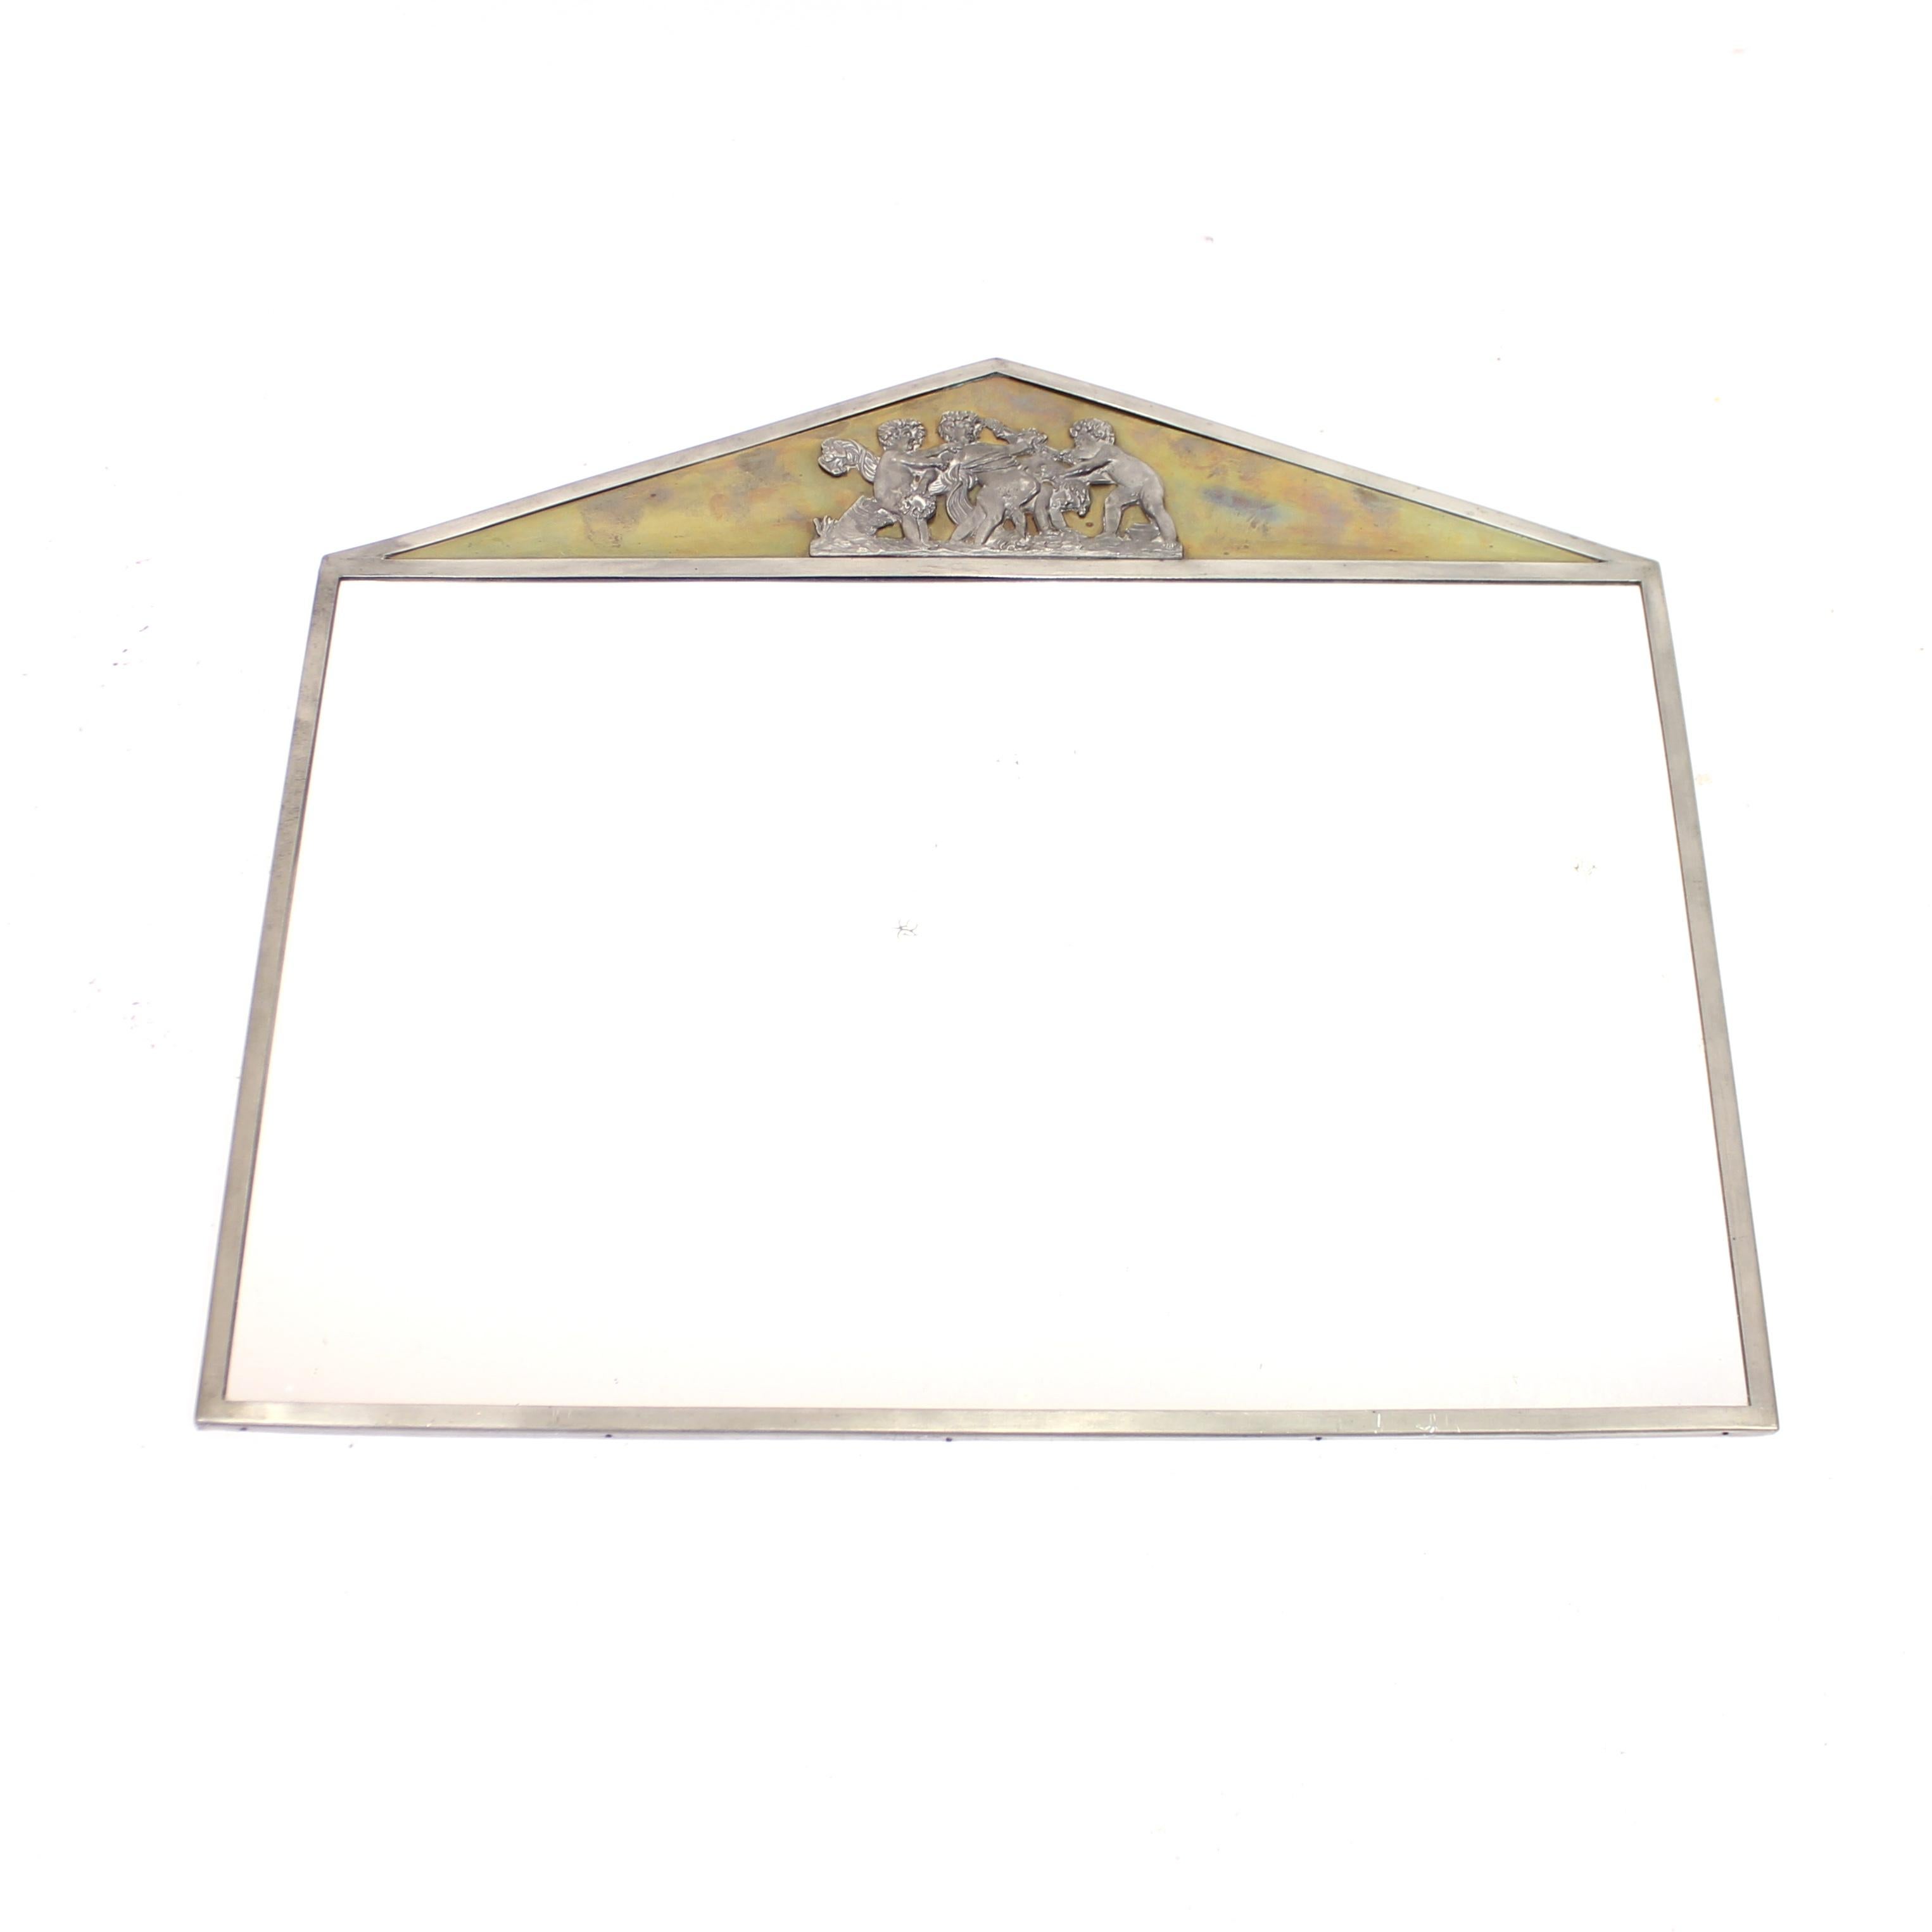 Unique Swedish Grace Pewter and Brass Mirror by C.G. Råström, 1928 In Good Condition For Sale In Uppsala, SE